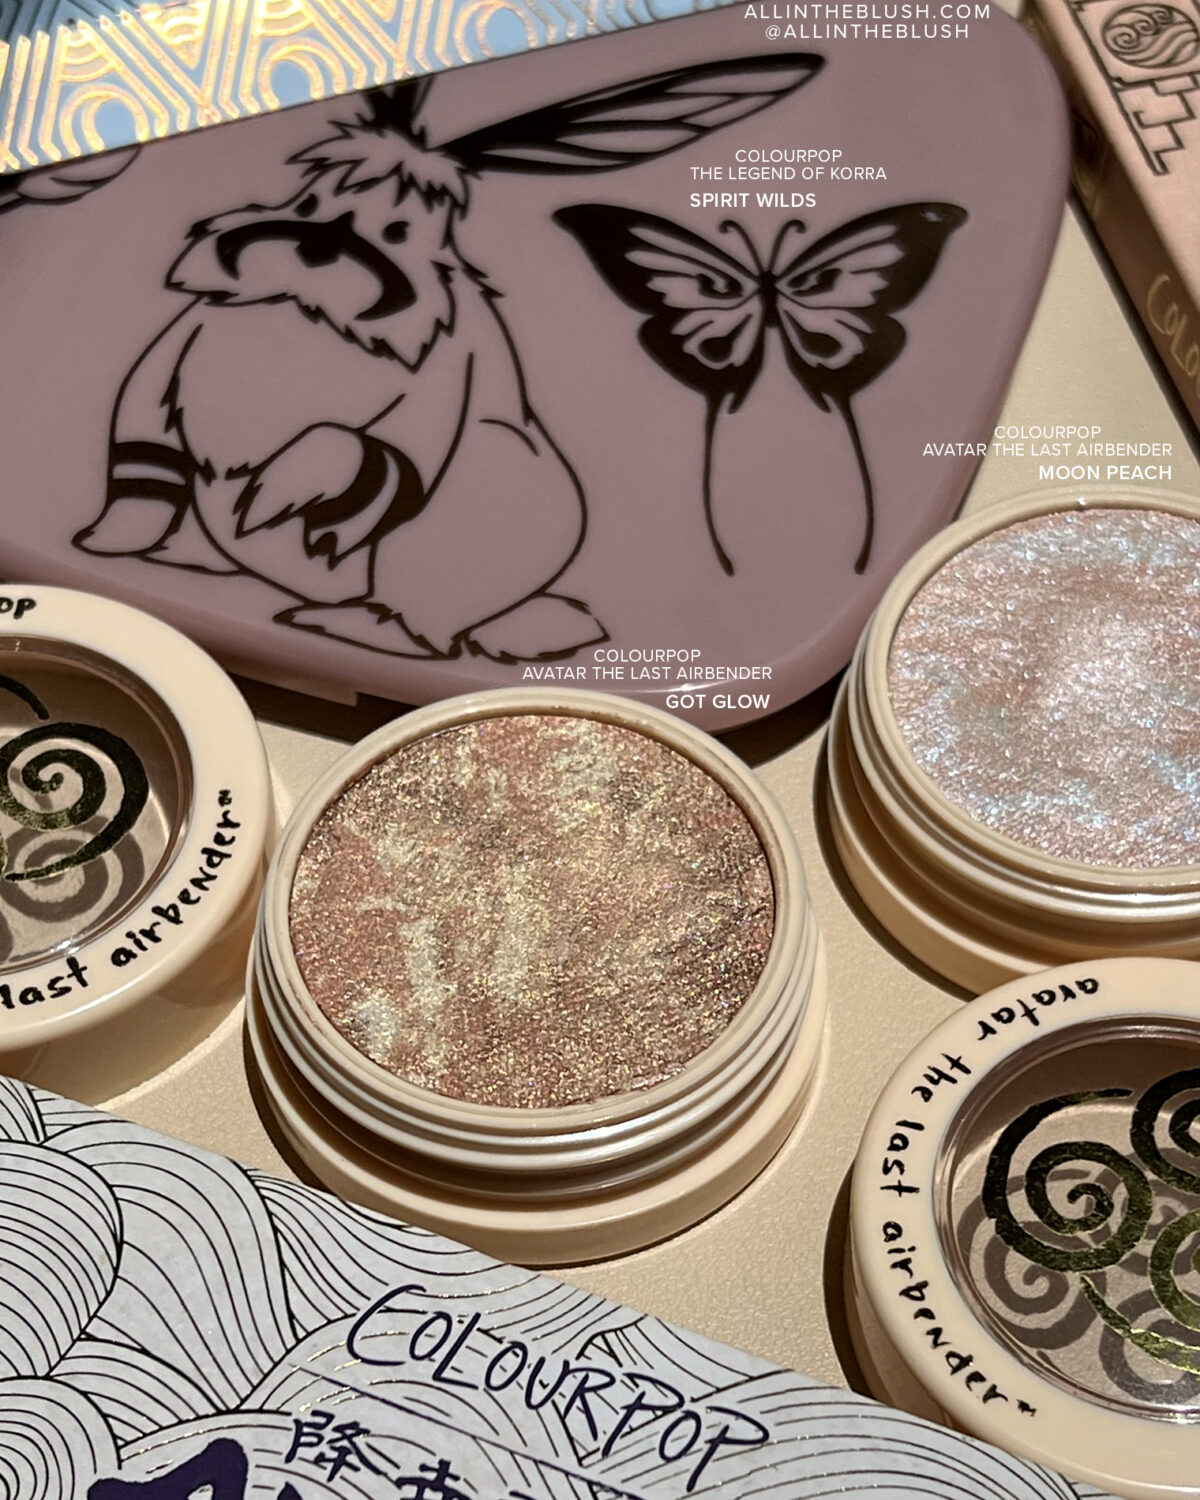 Comparing ColourPop Collections: The Last Airbender VS. The Legend of Korra